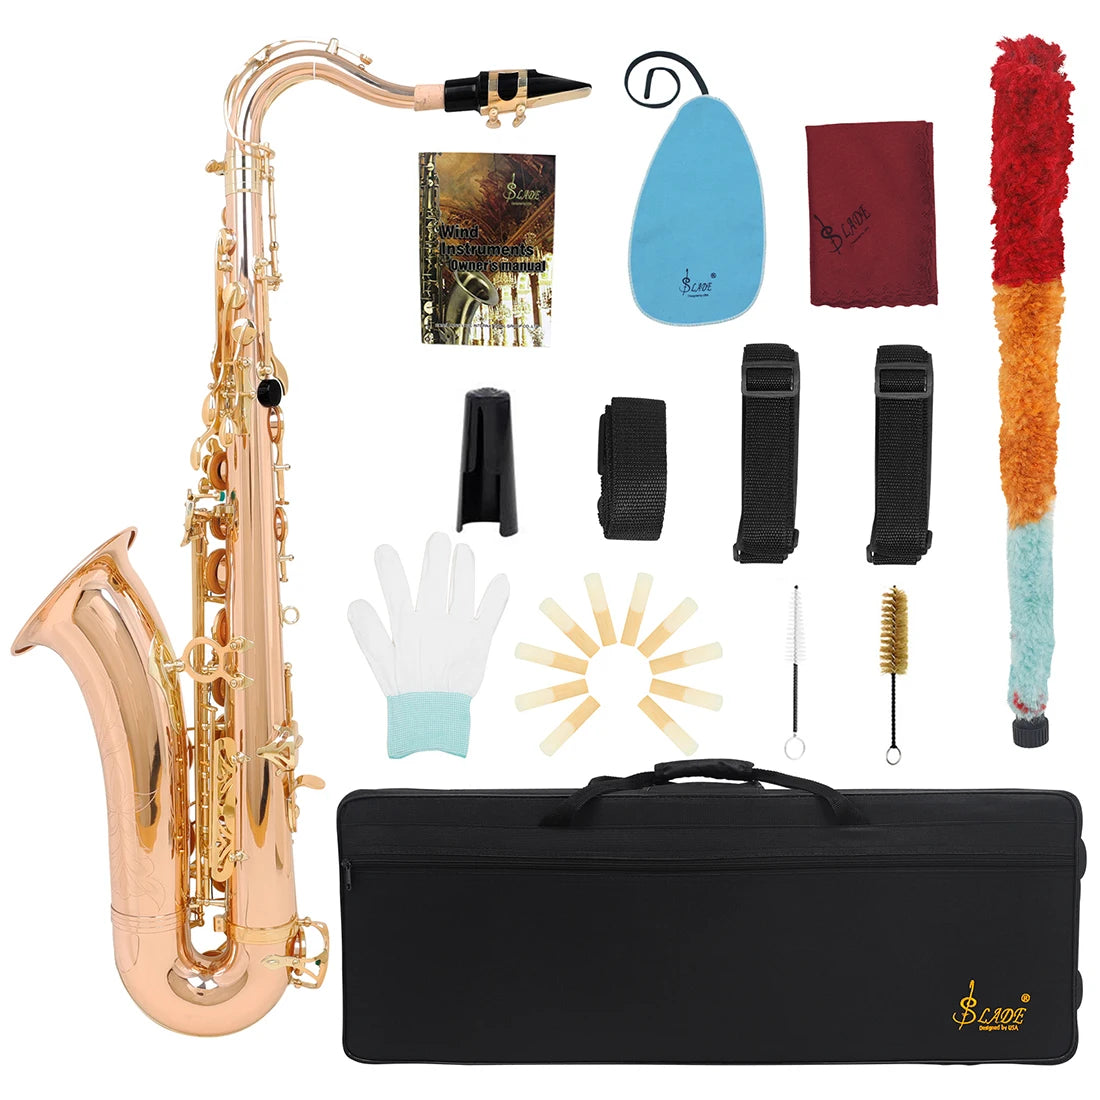 SALDE Tenor Saxophone Brass B-Flat Tenor Laser Engraved Sax Woodwind Instrument With Carrying Case Gloves Parts & Accessories